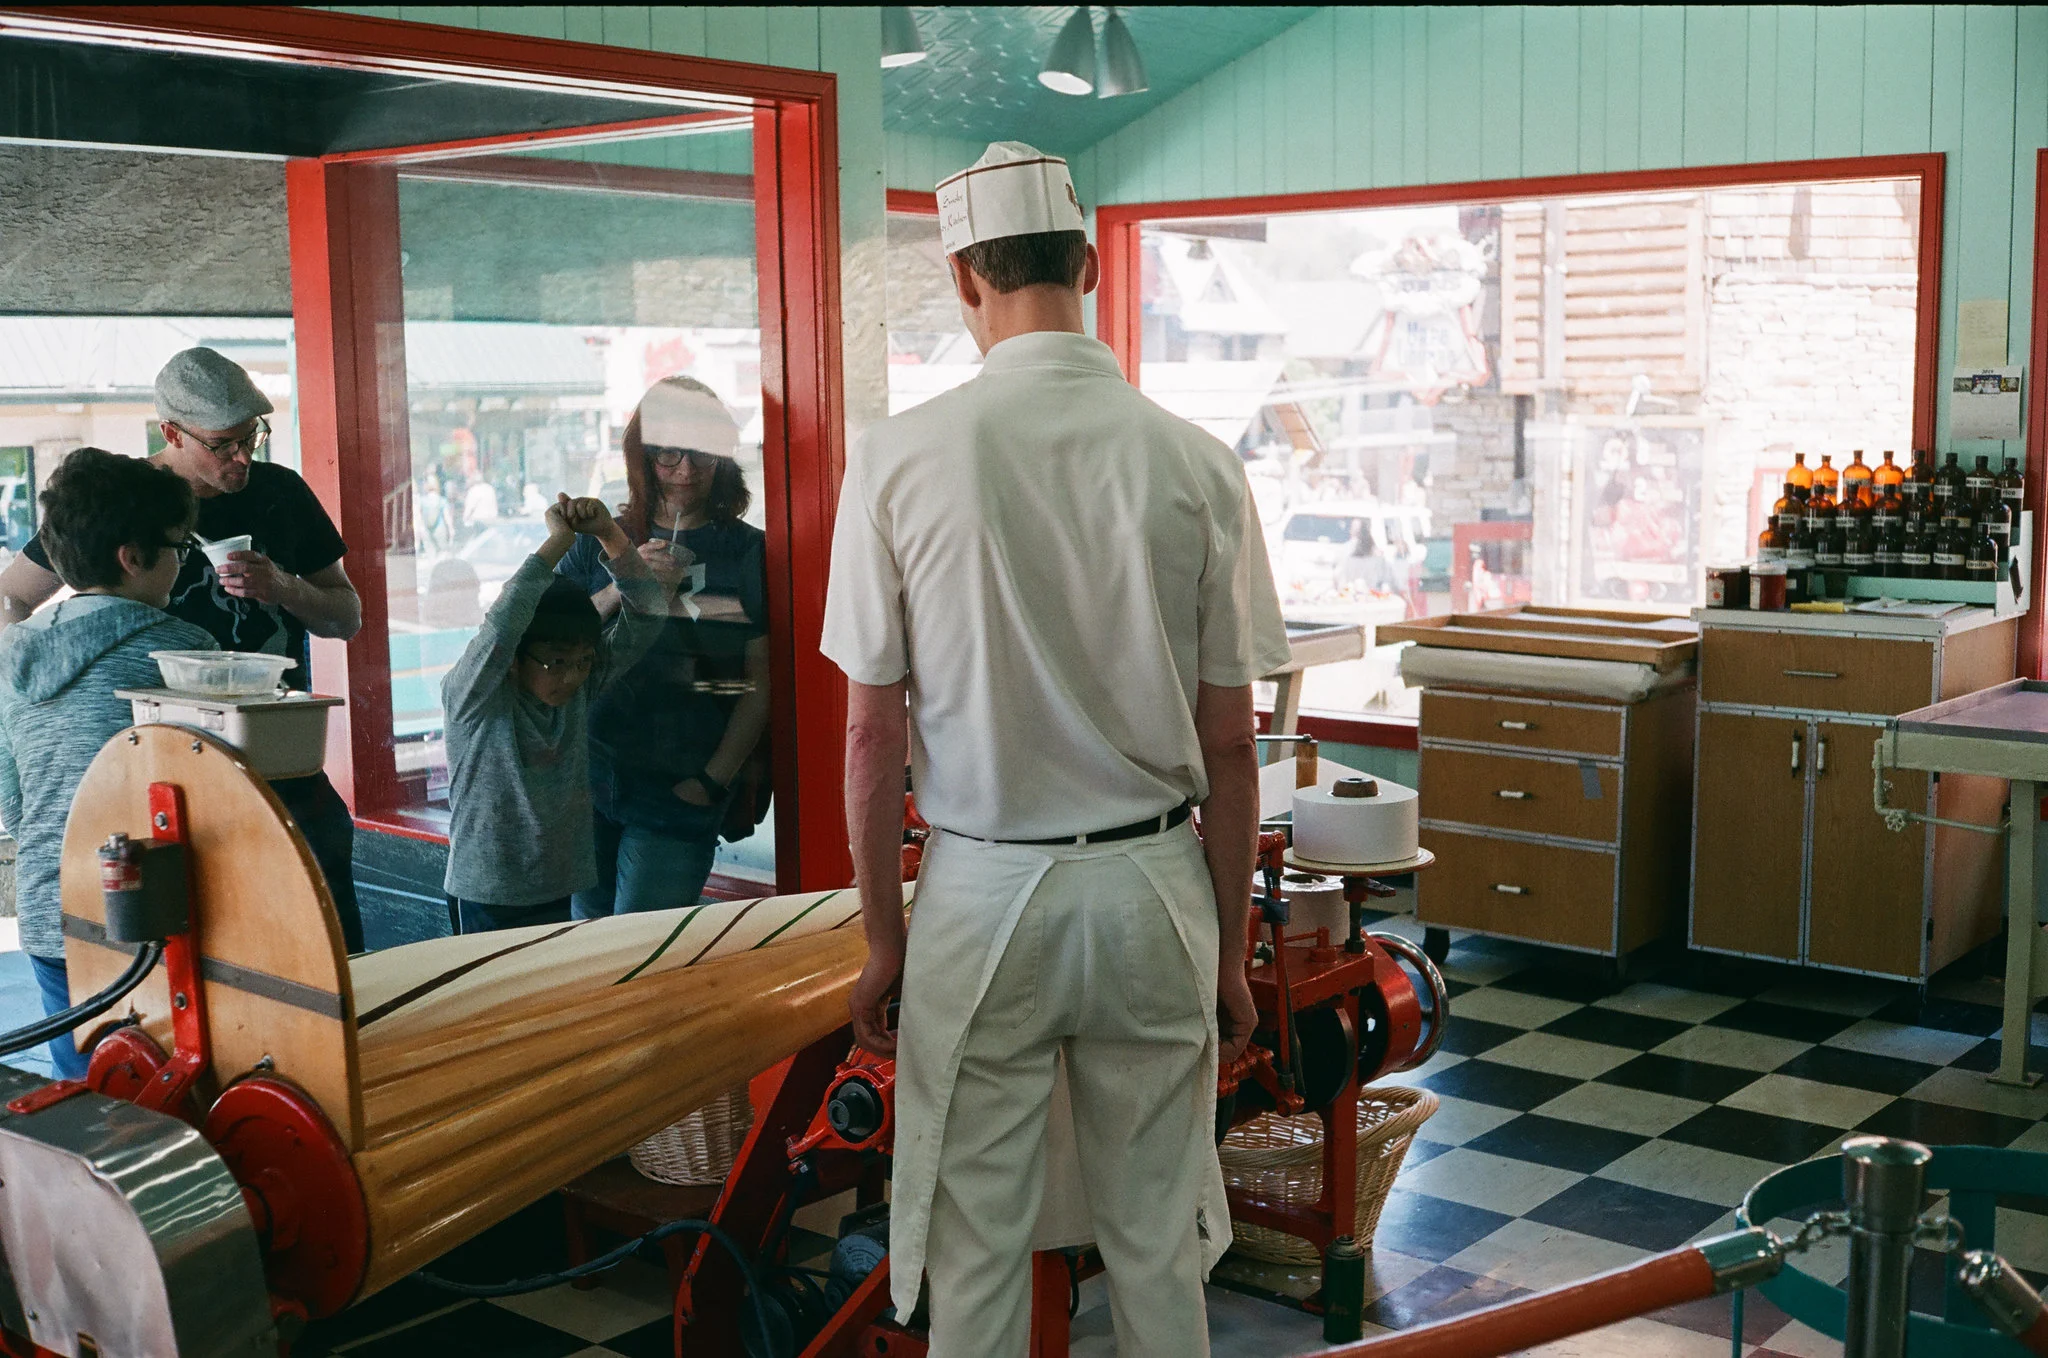 two children and adults waiting for a candy being made using a traditional candy machine operated by a store crew wearing a white uniform in ole smoky candy kitchen, one of the best things to do in gatlinburg, tennessee